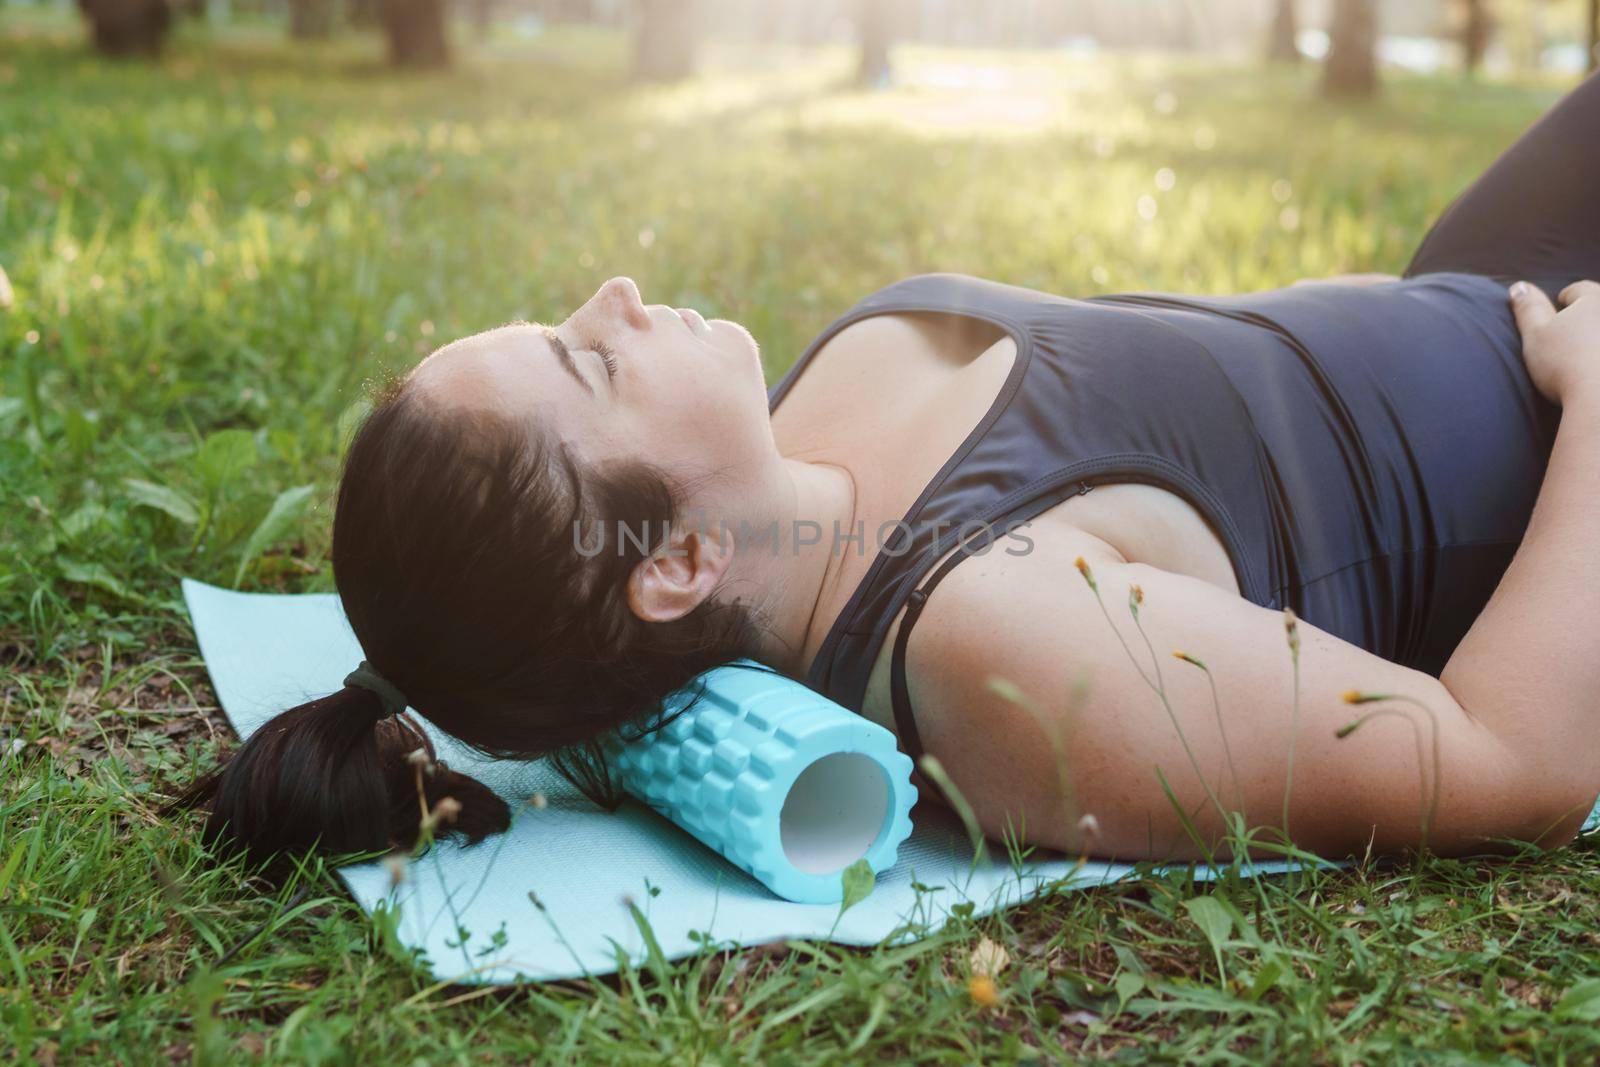 A charming brunette woman plus-size body positive practices sports in nature. Woman is engaged with a massage roller for the body in the park on a sports mat.